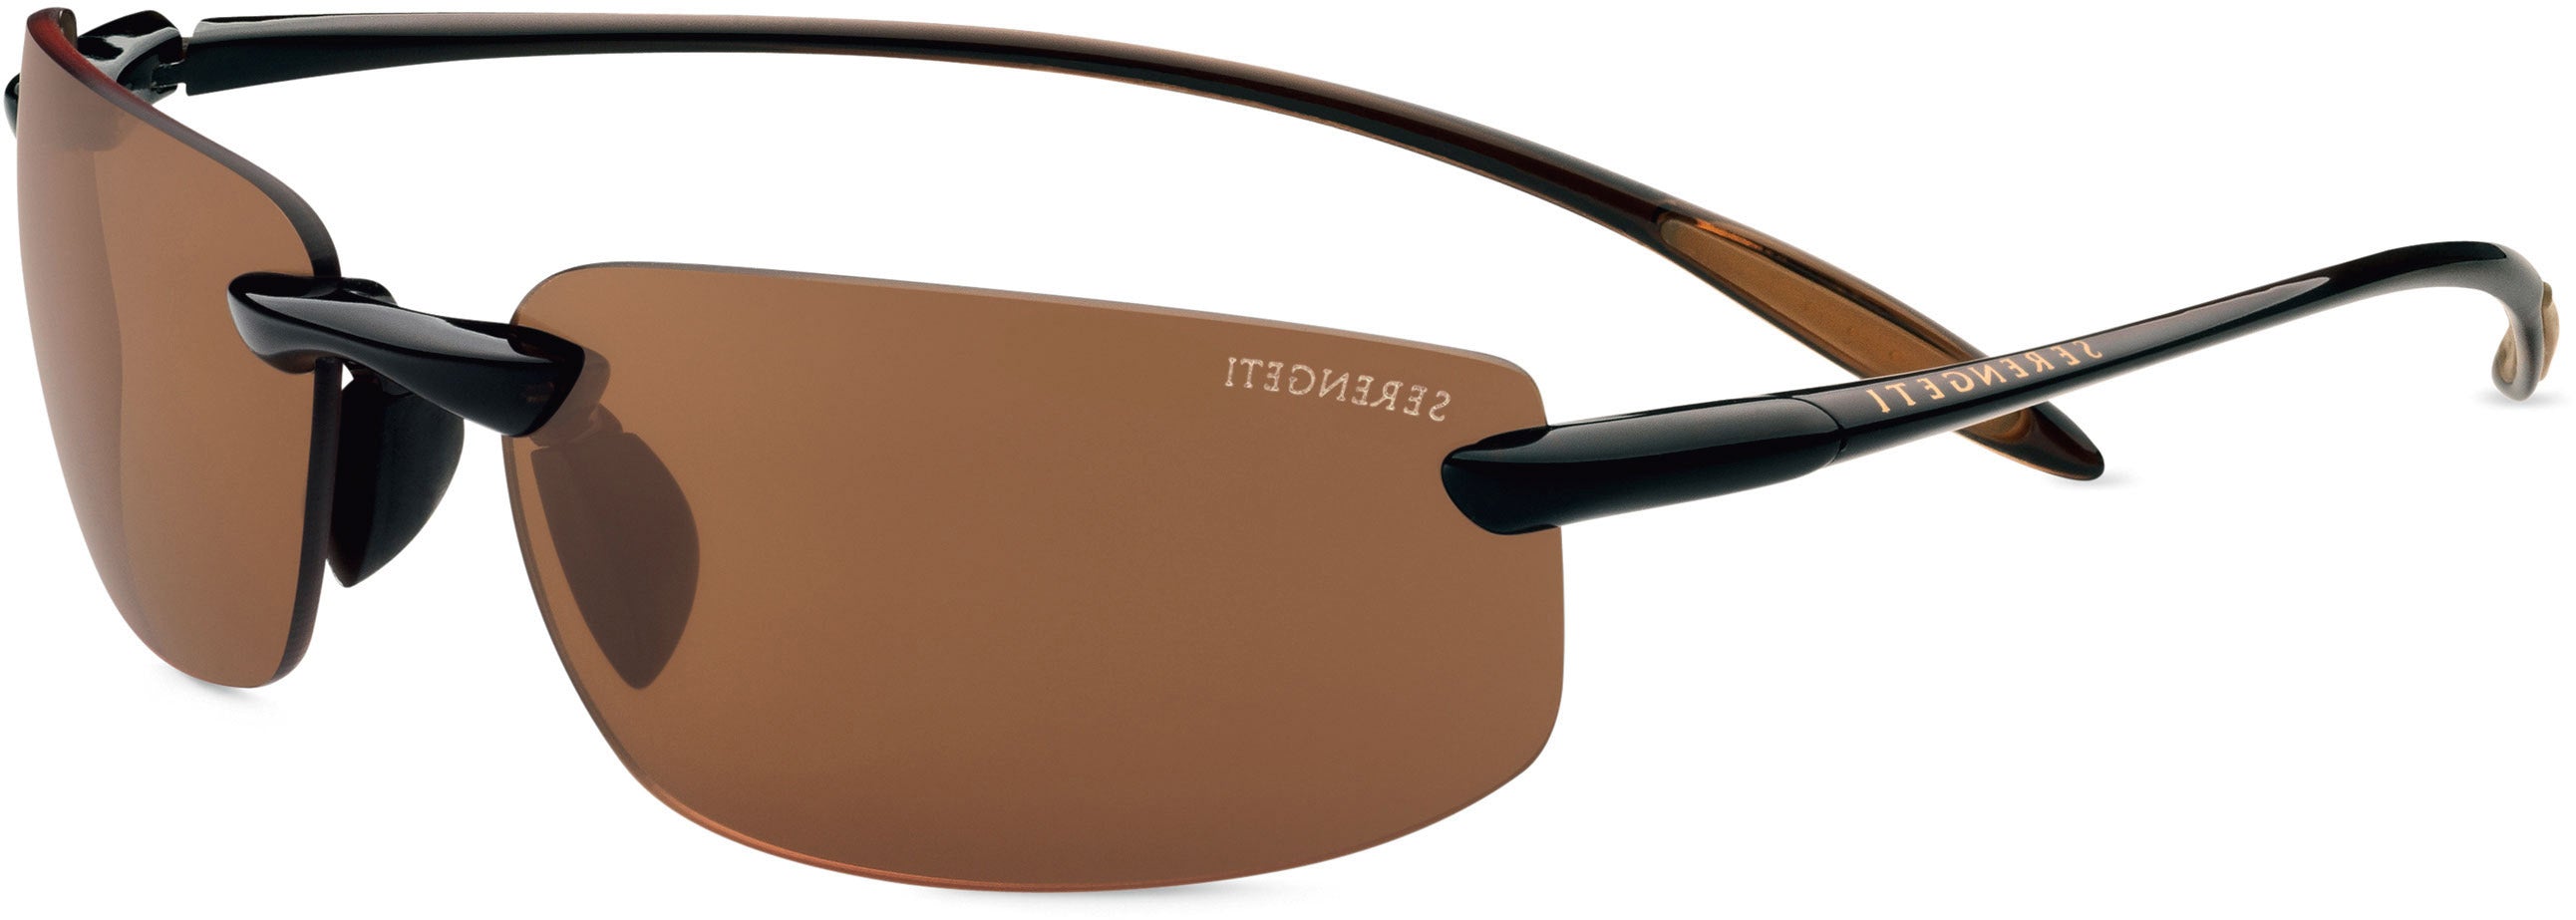 Color_Shiny Brown - Polarized Drivers ( 7807 )